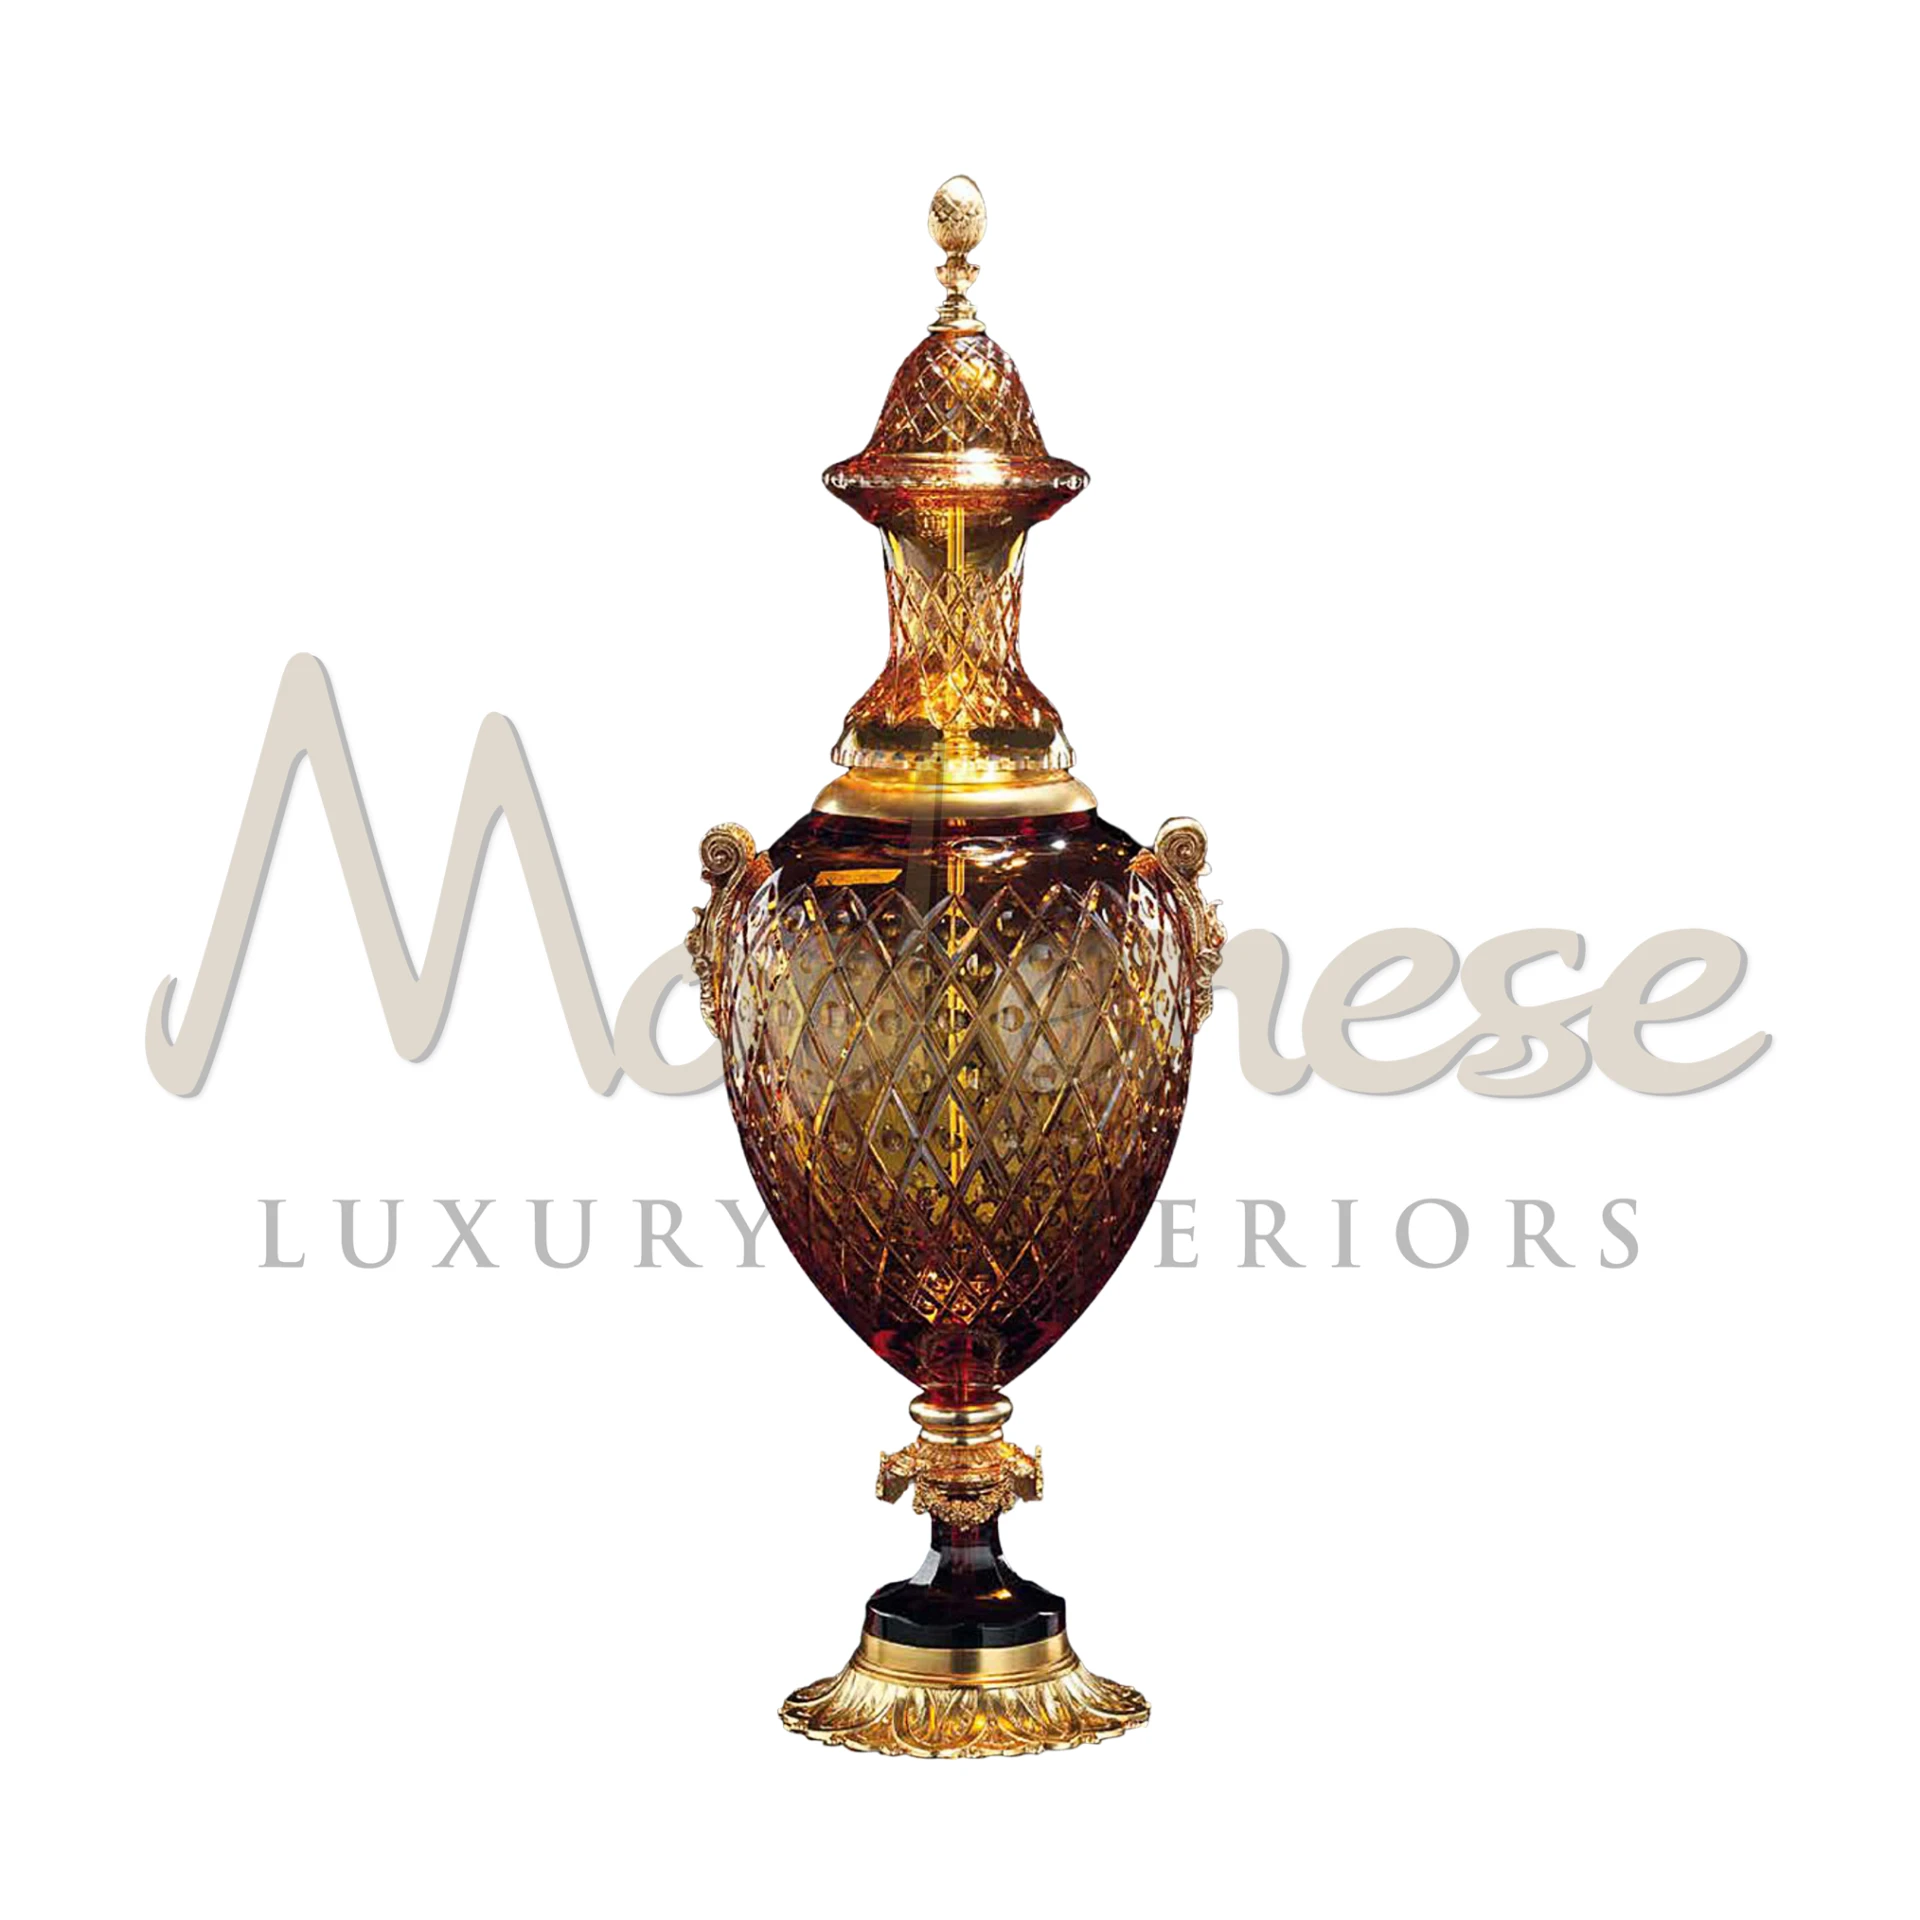 Ornate Victorian-style crystal vase with intricate etchings, ideal for adding classic elegance to luxury and baroque interior designs.